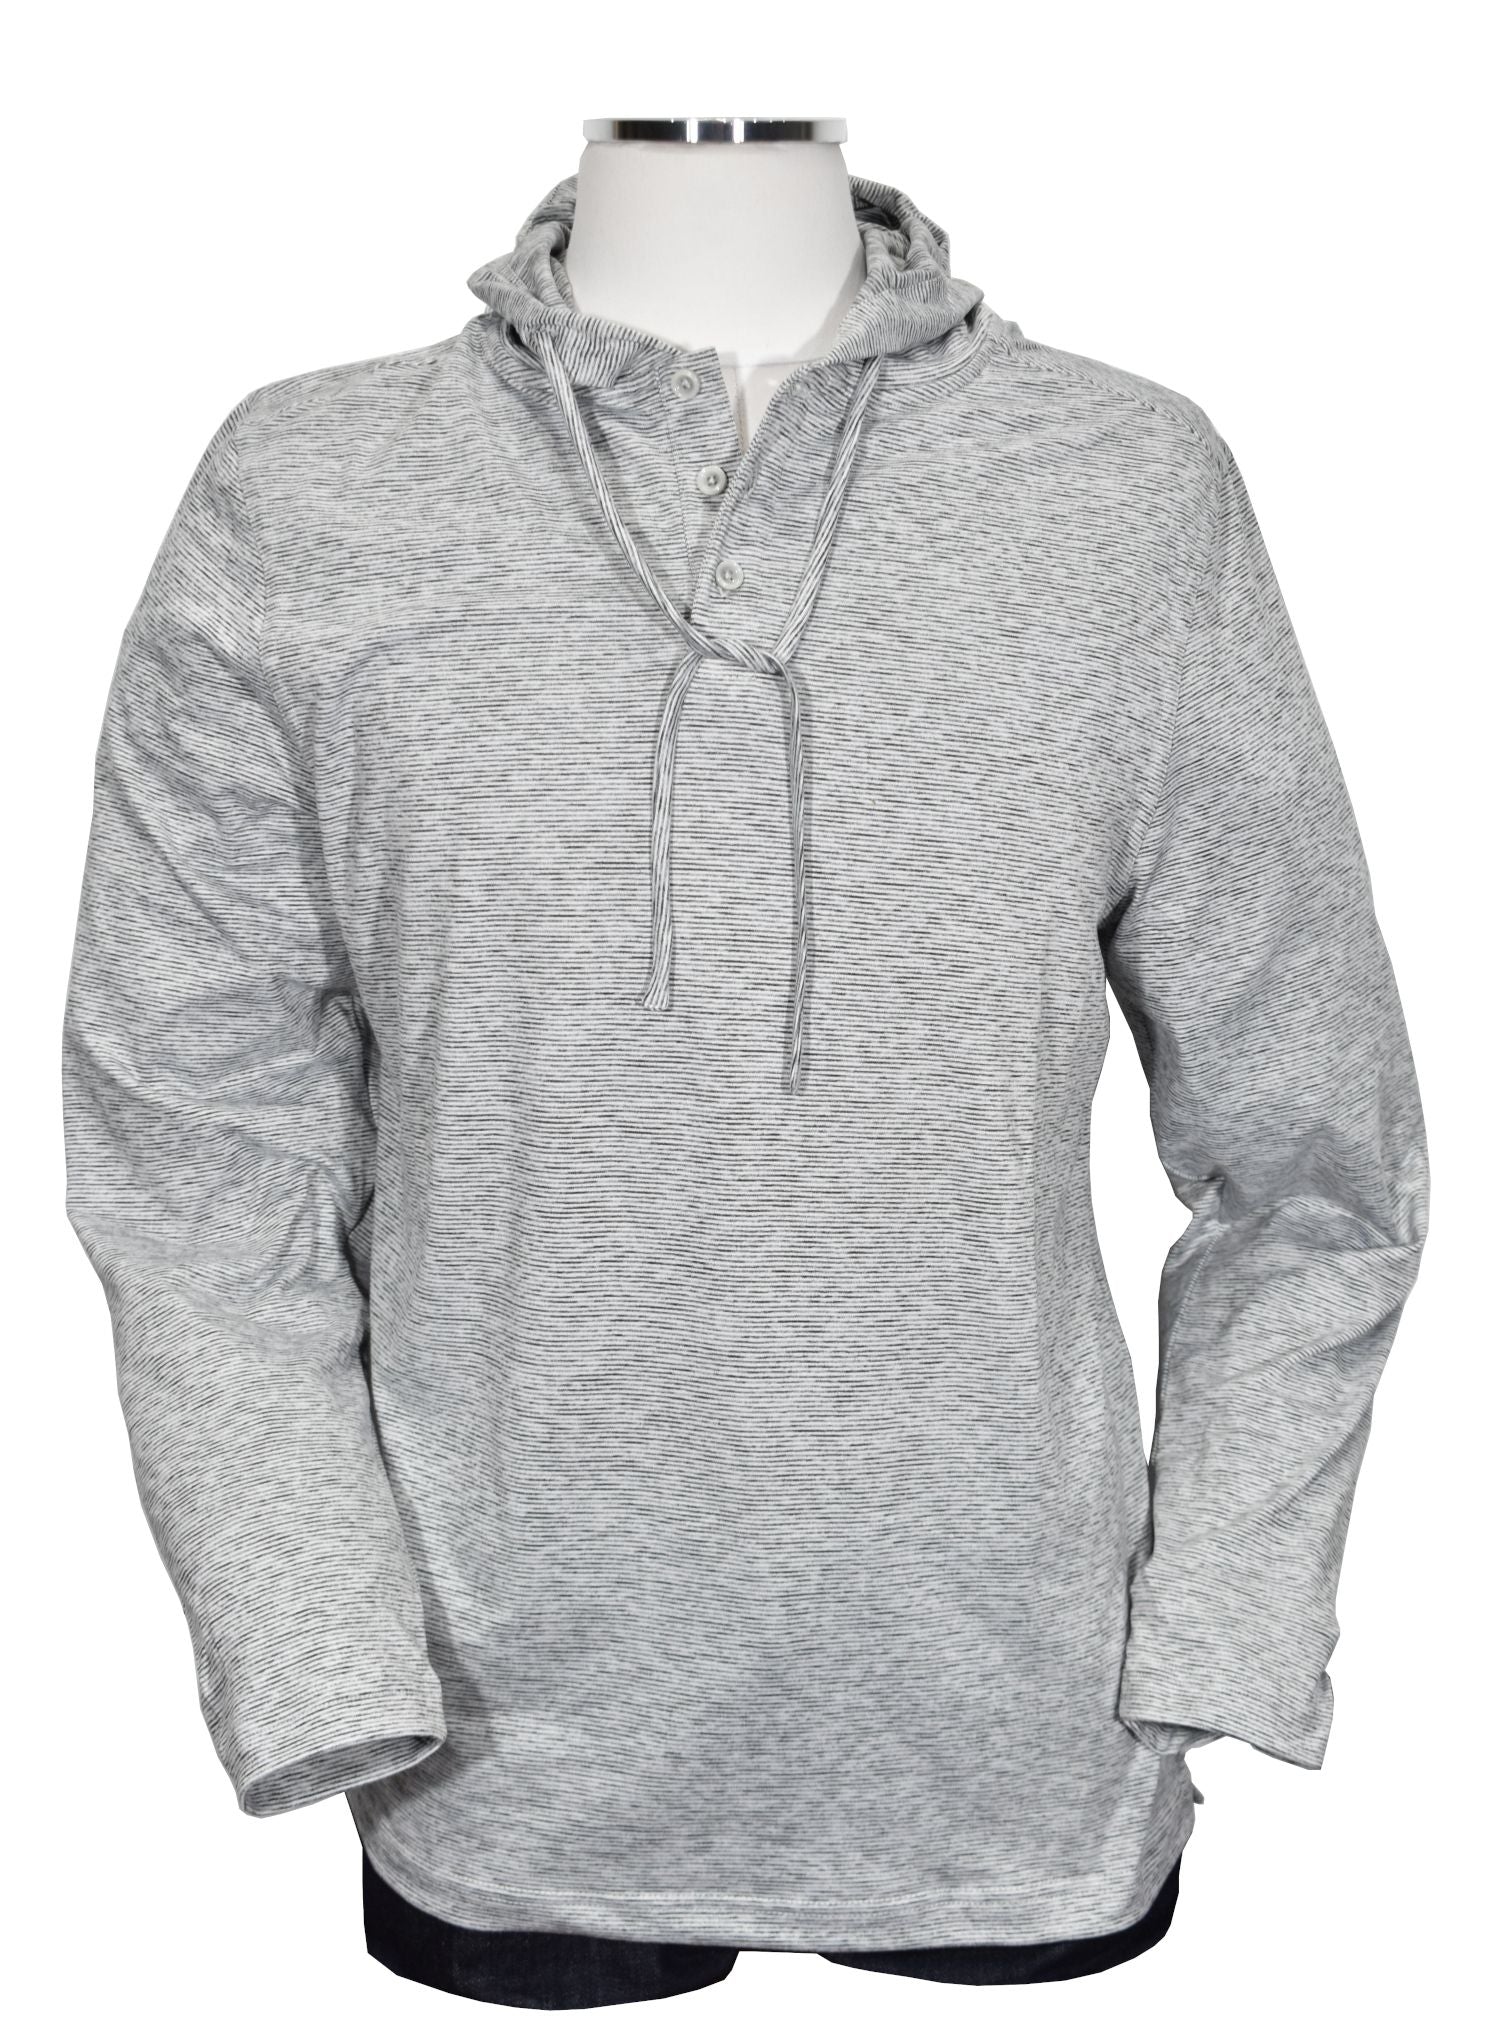 This classic fit feed stripe hoodie offers a contemporary style in a lightweight fabric with a soft, silky feel. The open sleeve and open bottom provide added mobility for all-day comfort. Available in gray or blue, it is the perfect hoodie for any occasion.  Classic fit.  Open sleeve and open bottom, super soft and a little heavier than a tee shirt. 